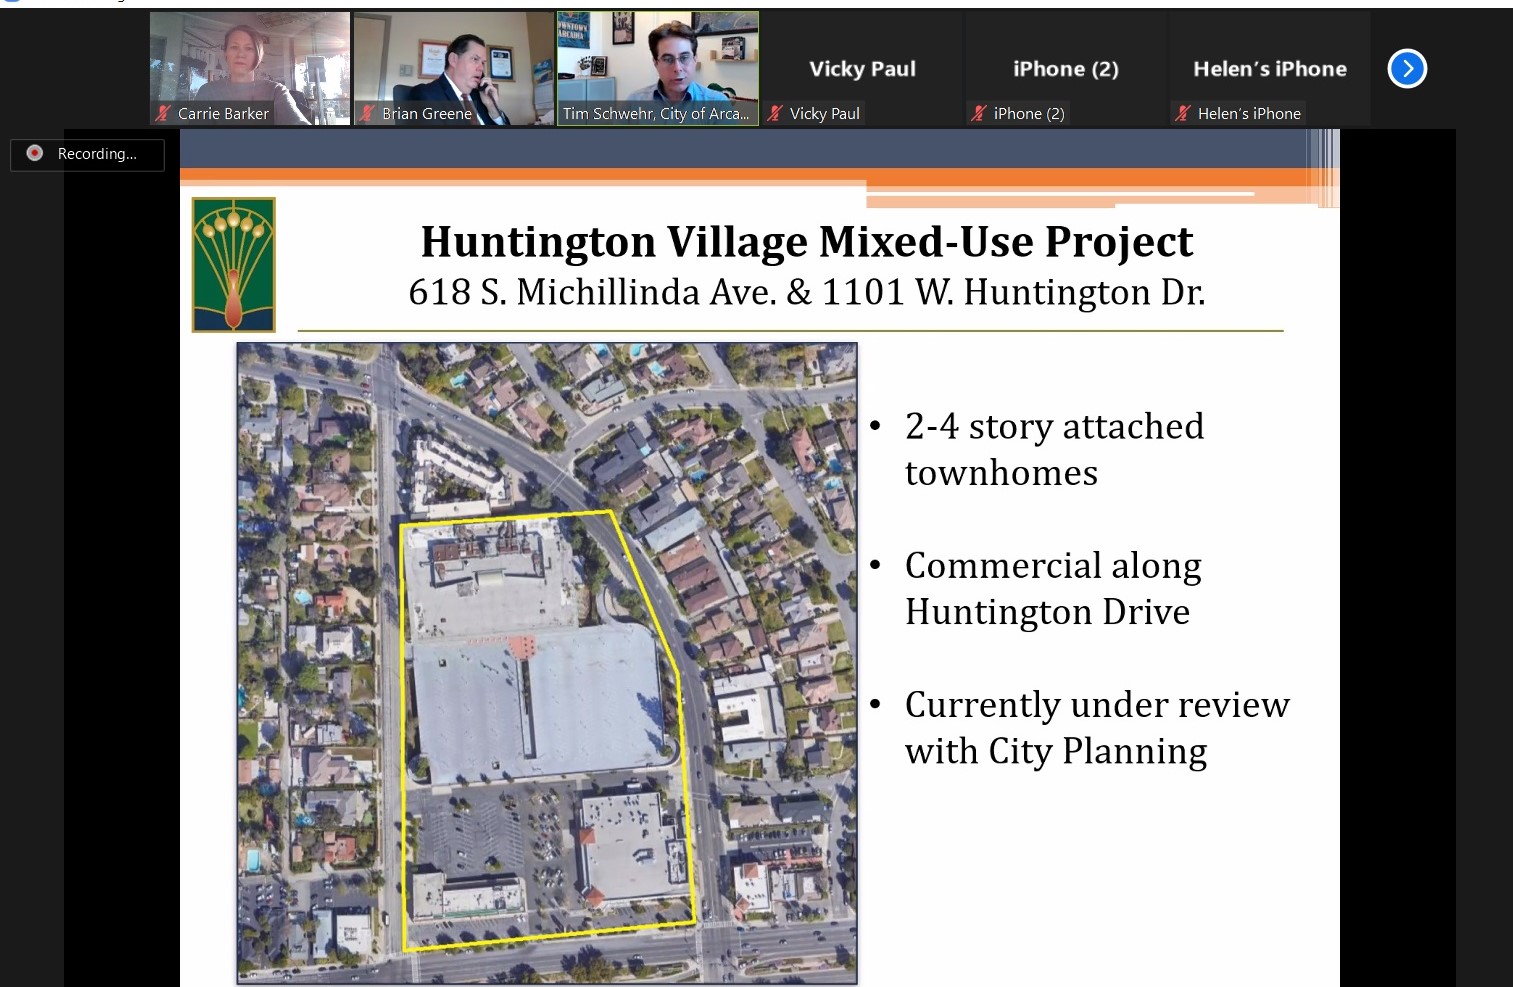 slide image from a zoom call shoring huntington village mixed use project renderings